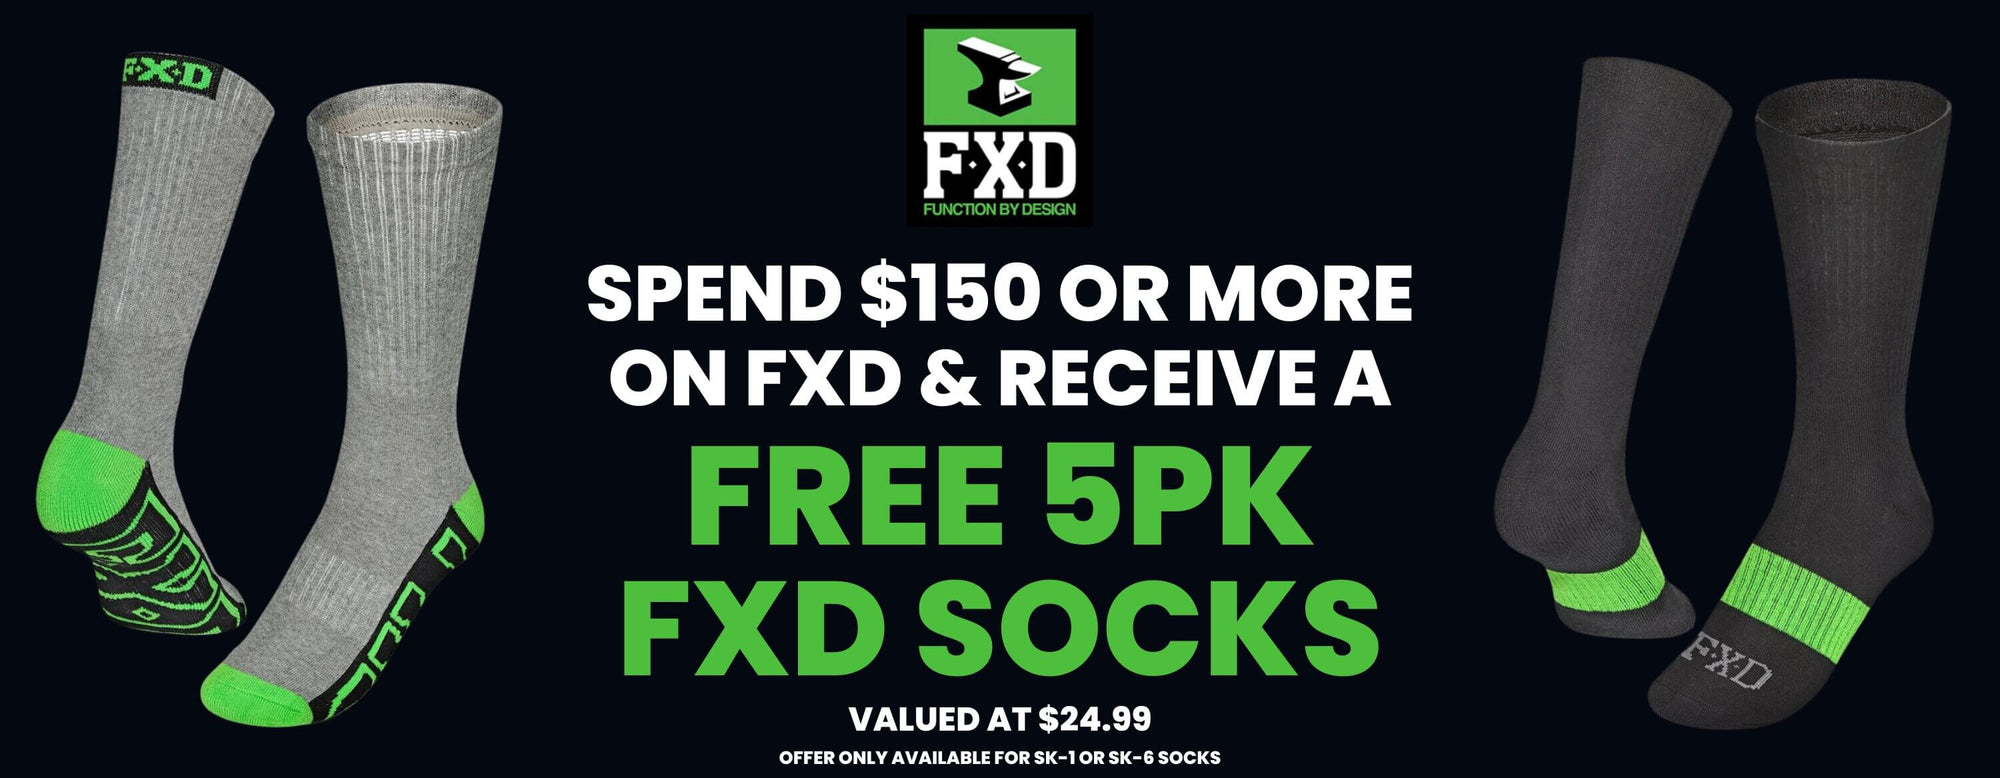 Spend $150 on FXD and Receive a Free 5 Pack of FXD Socks